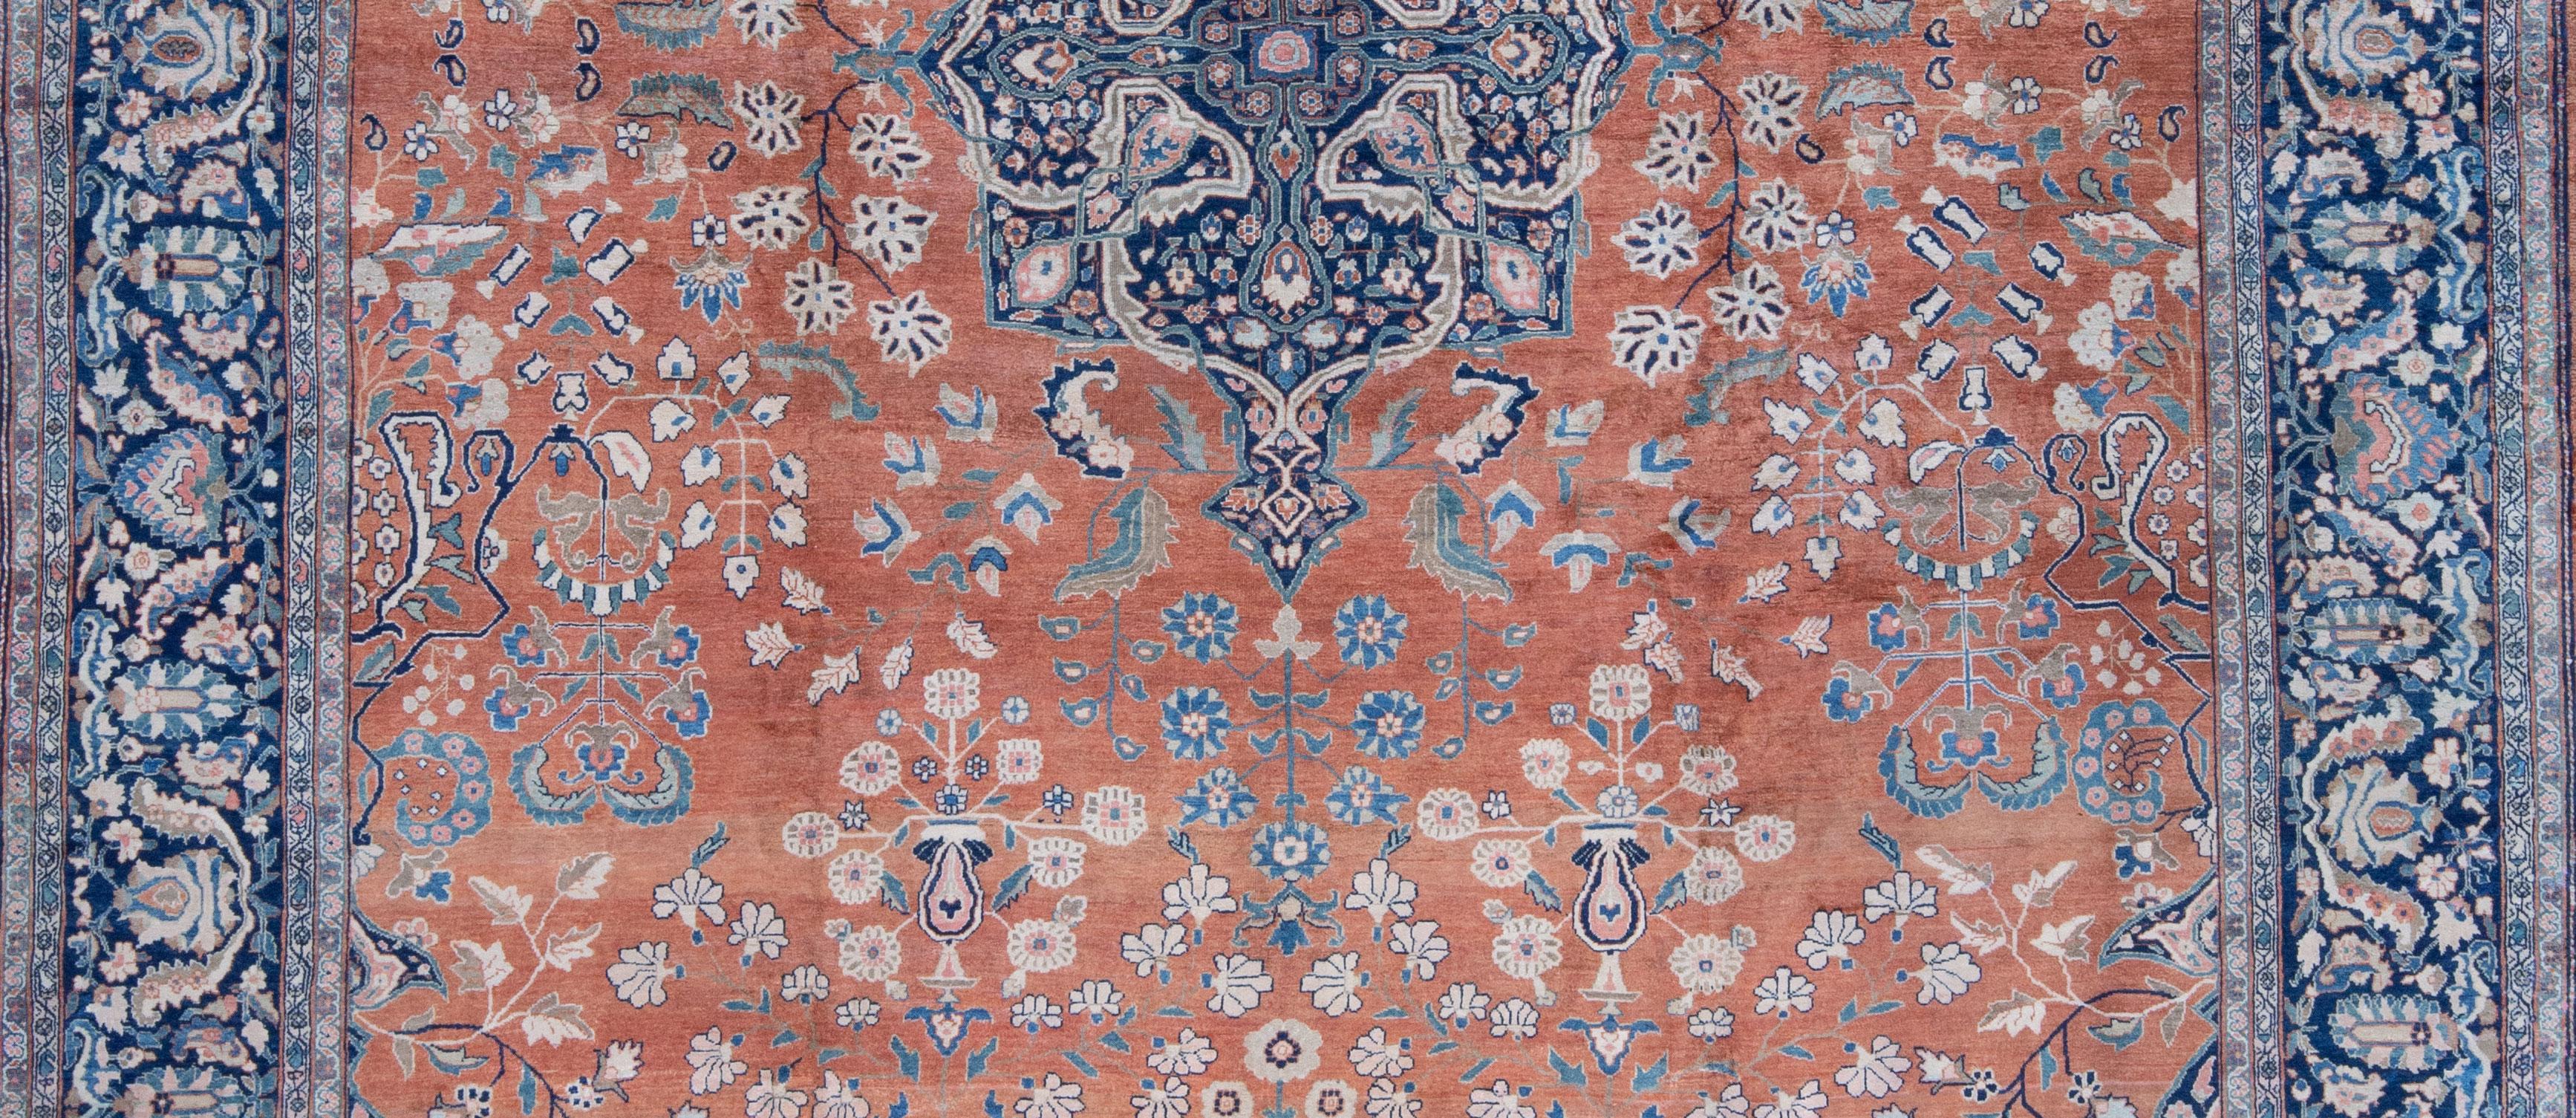 Wool Oversized Antique Persian Ferahan Sarouk Coral and Blue Rug, late 19th Century For Sale